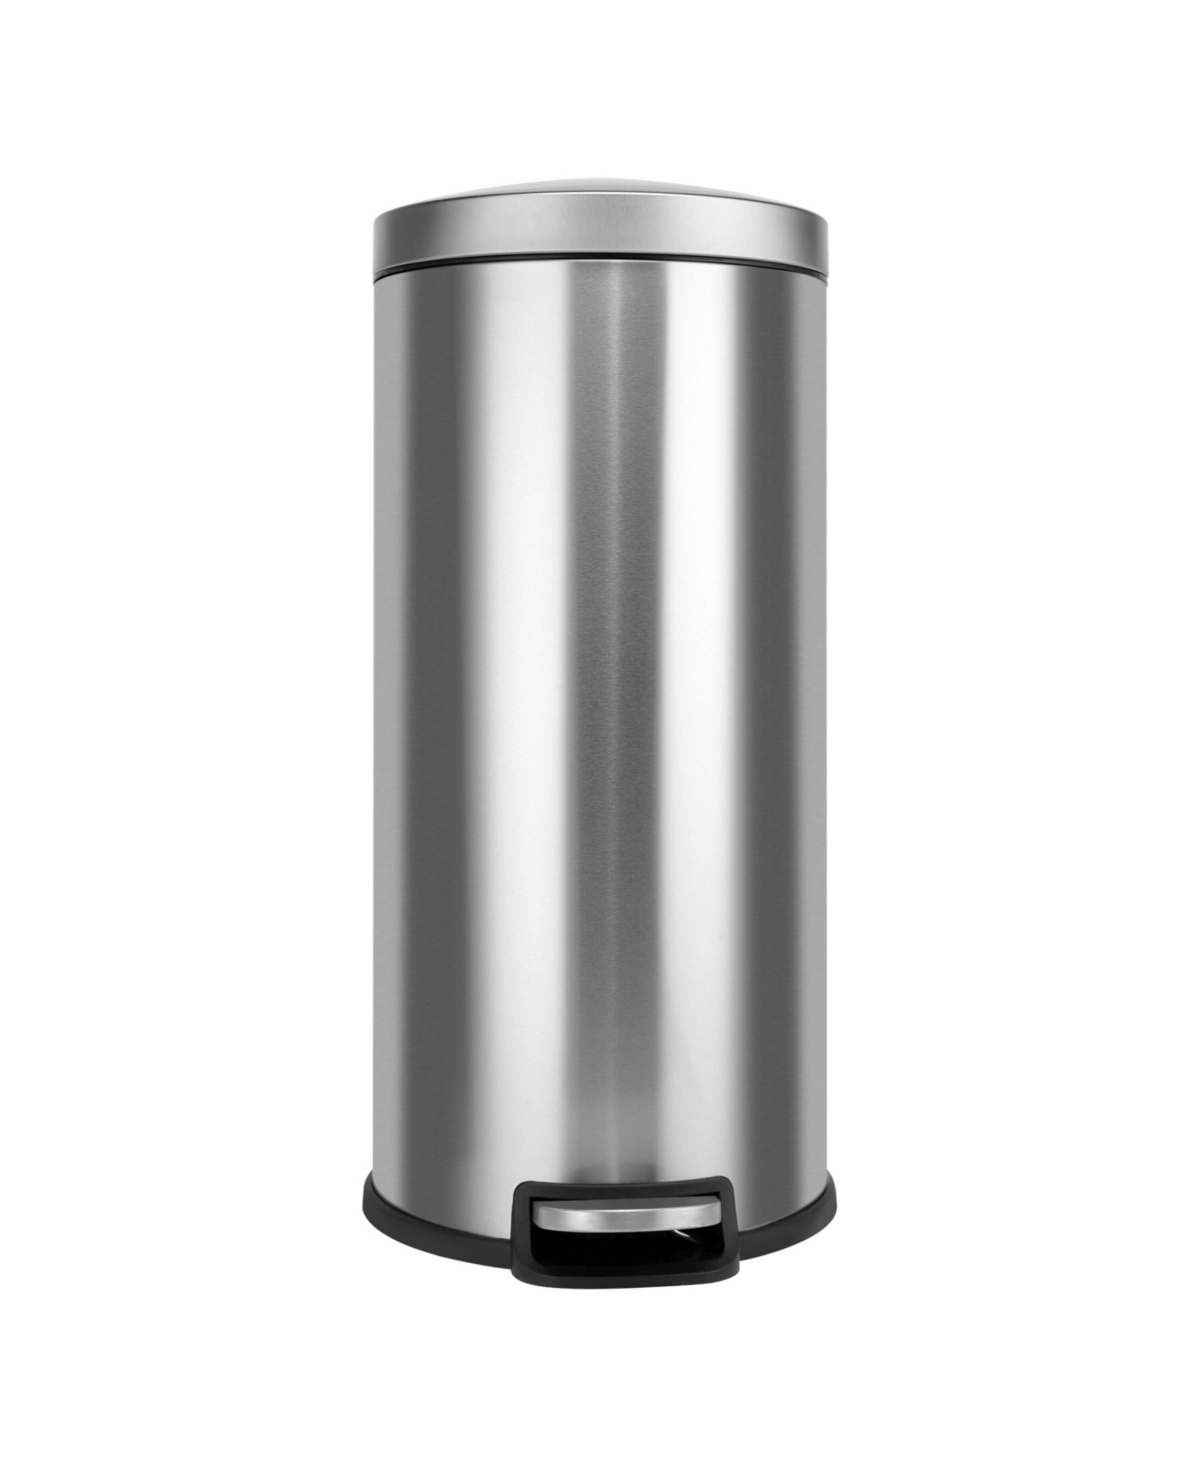 8 Gal./30 Liter Stainless Steel Round Step-on Trash Can for Kitchen - Silver